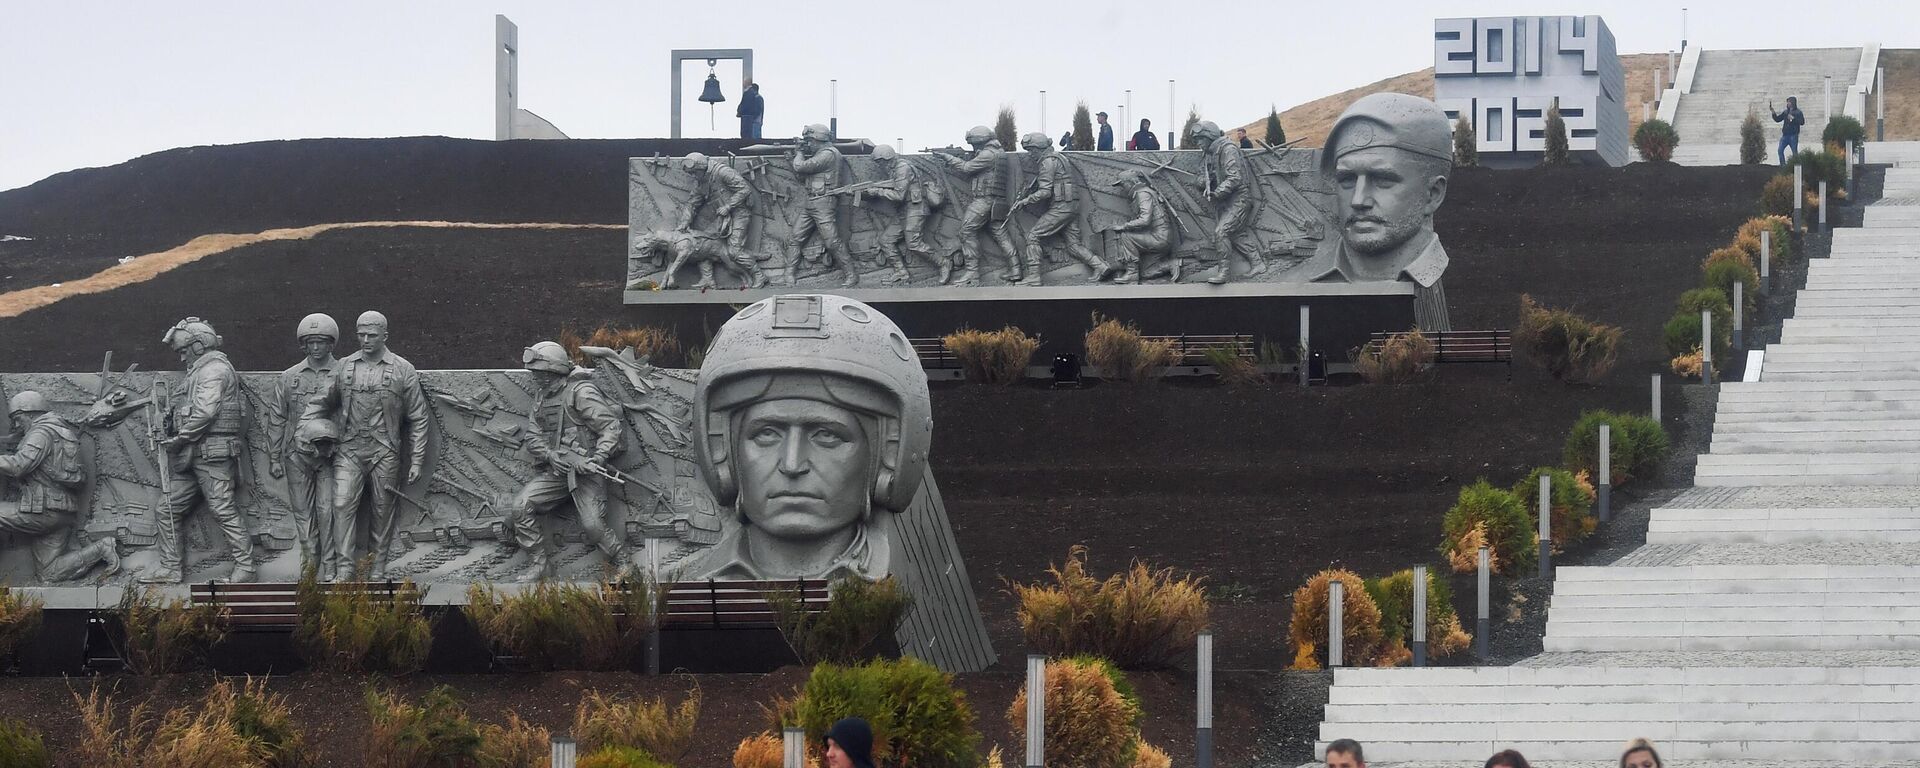 People walk down the stairs at the Savur-Mogyla war memorial complex with a bas-relief of Vladimir Zhoga, leader of the Sparta Battalion rebel military group in the Donetsk People's Republic (DPR), seen in the background, as Russia's military operation in Ukraine continues, near the city of  Snezhnoe, Donetsk People's Republic - Sputnik International, 1920, 20.09.2022